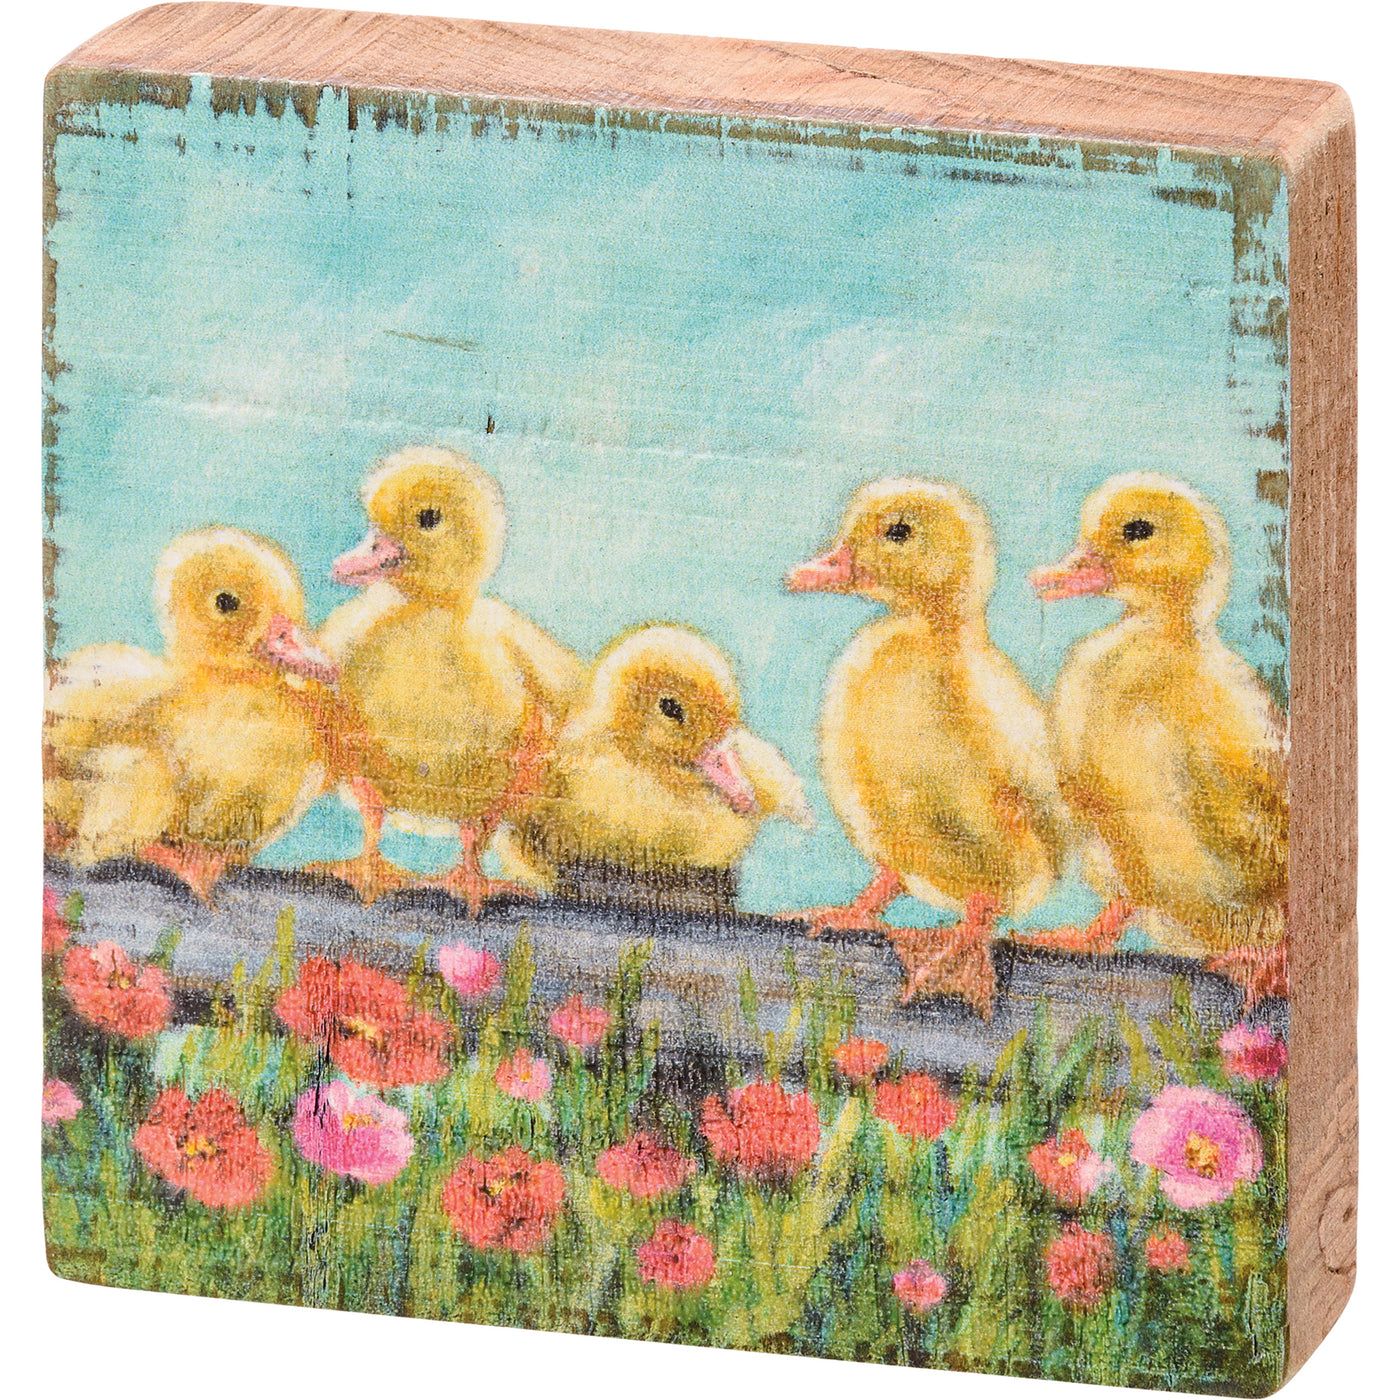 Ducklings in a Row Small Wooden Block Sign